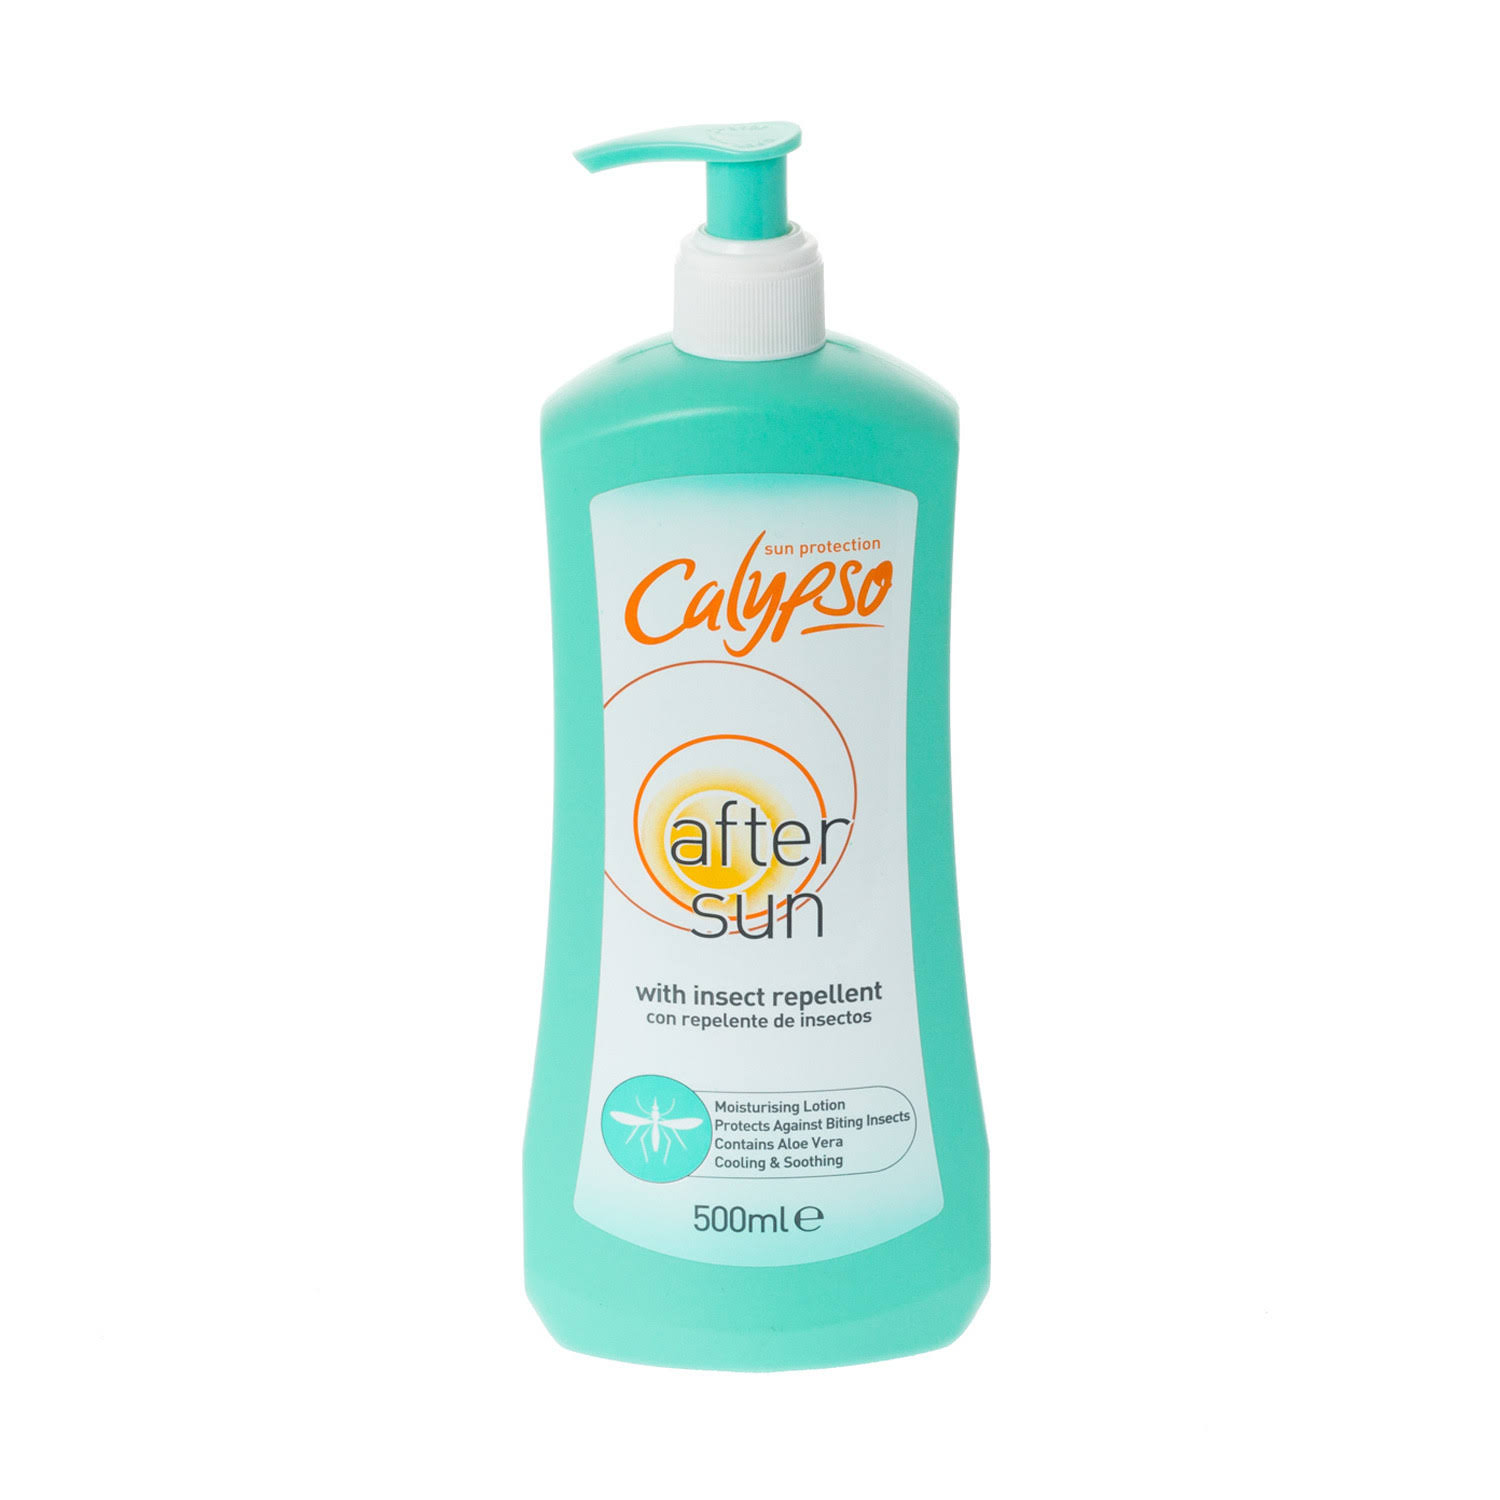 Calypso After Sun Lotion with Insect Repellent 500ml